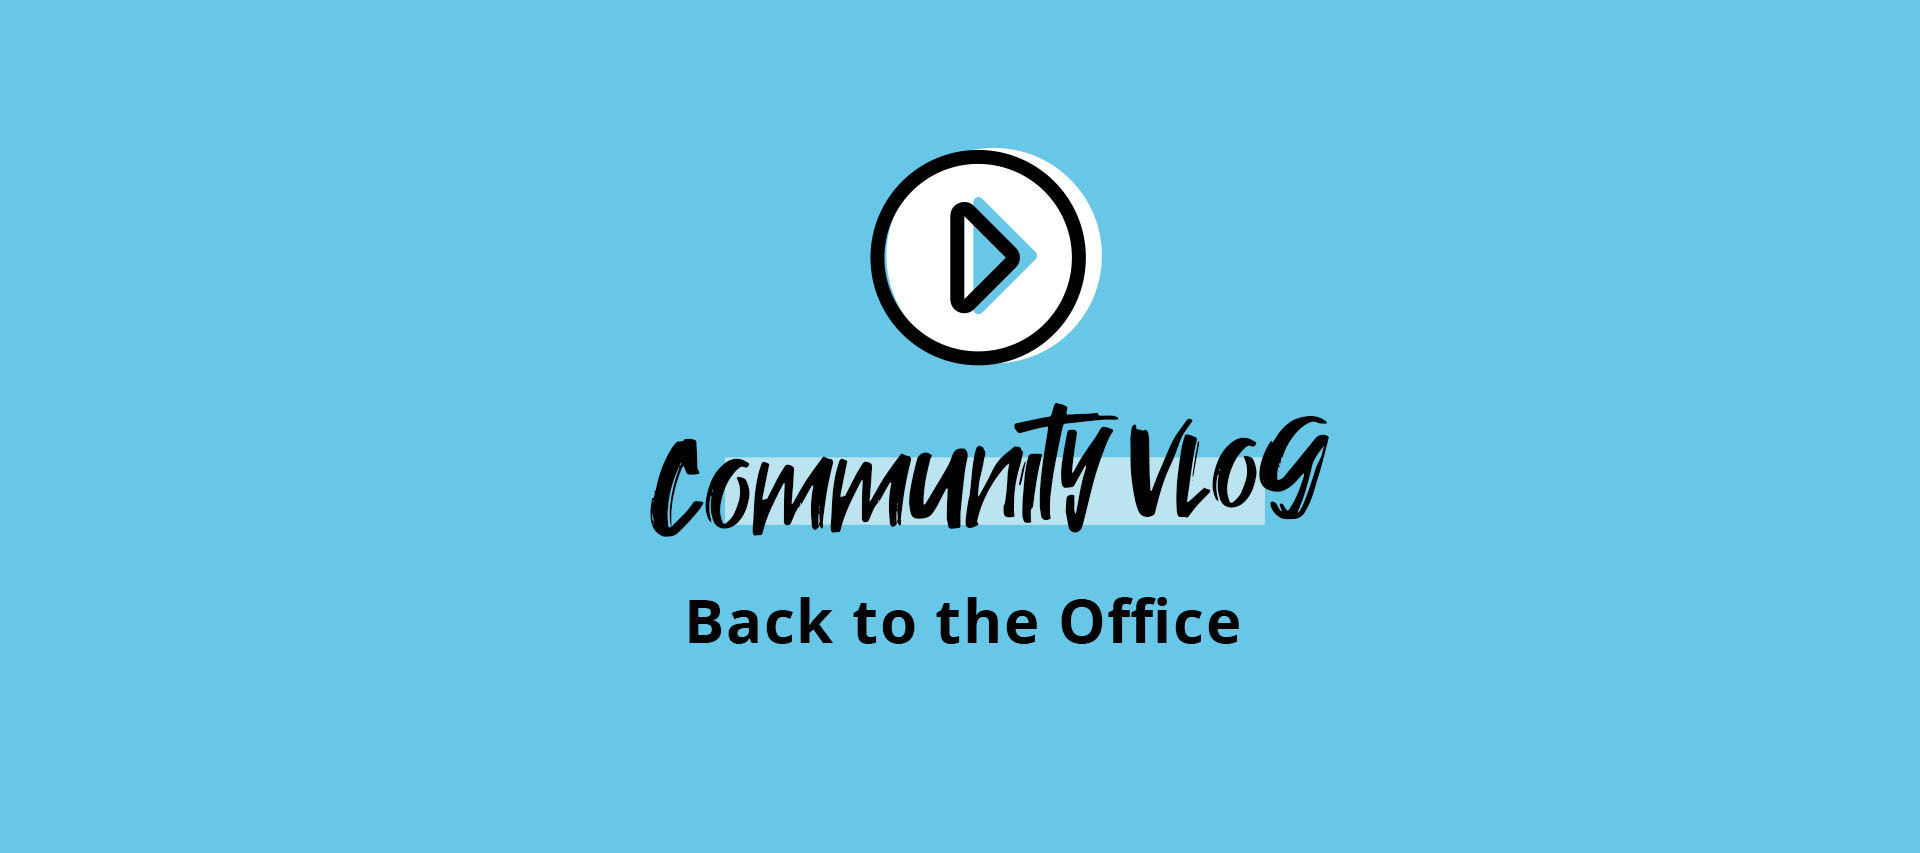 Personio Community Vlog - Back to the Office